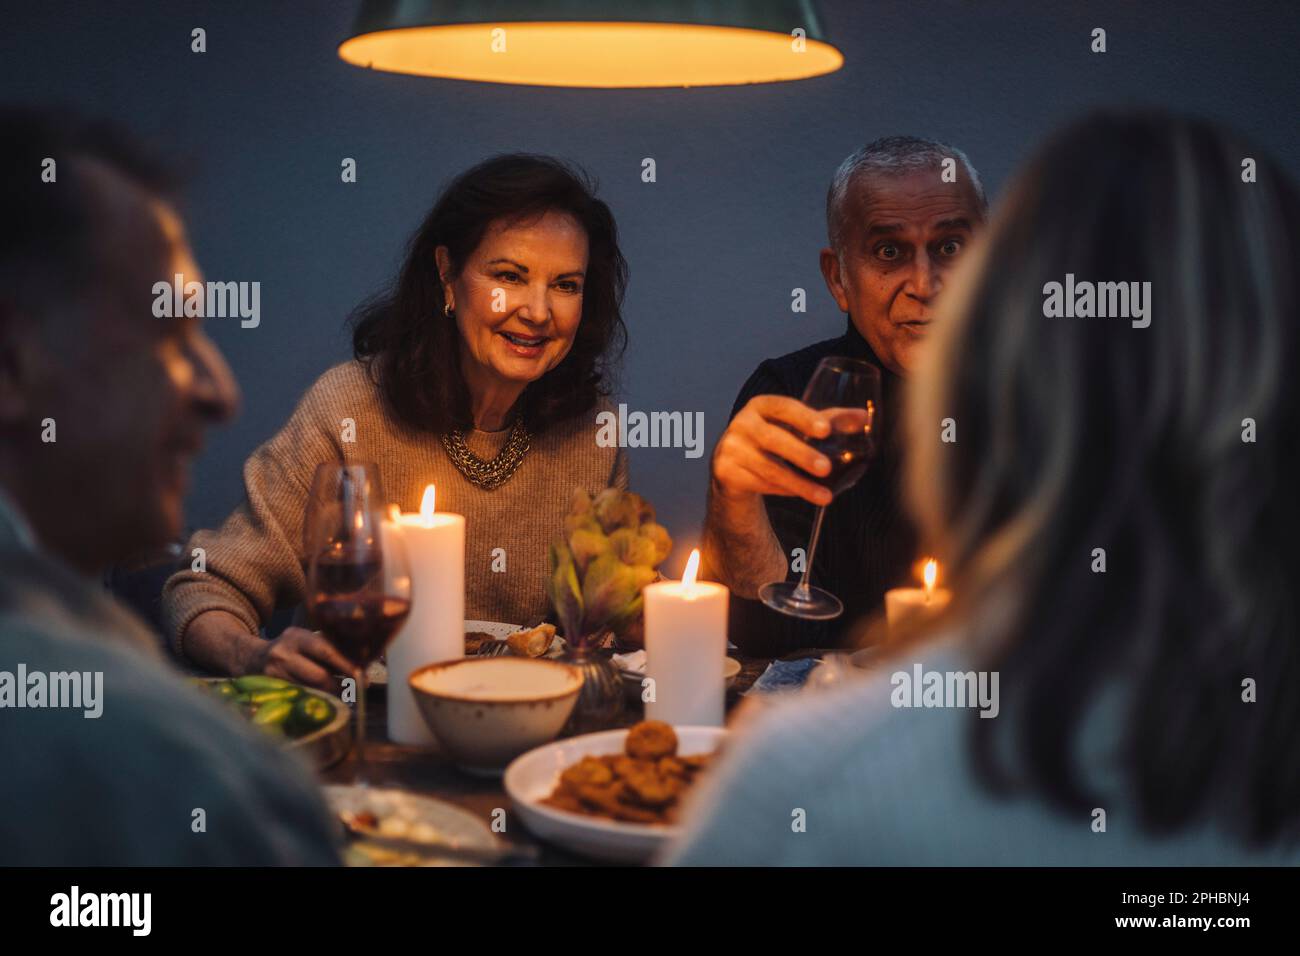 Smiling retired woman enjoying dinner with friends at party Stock Photo